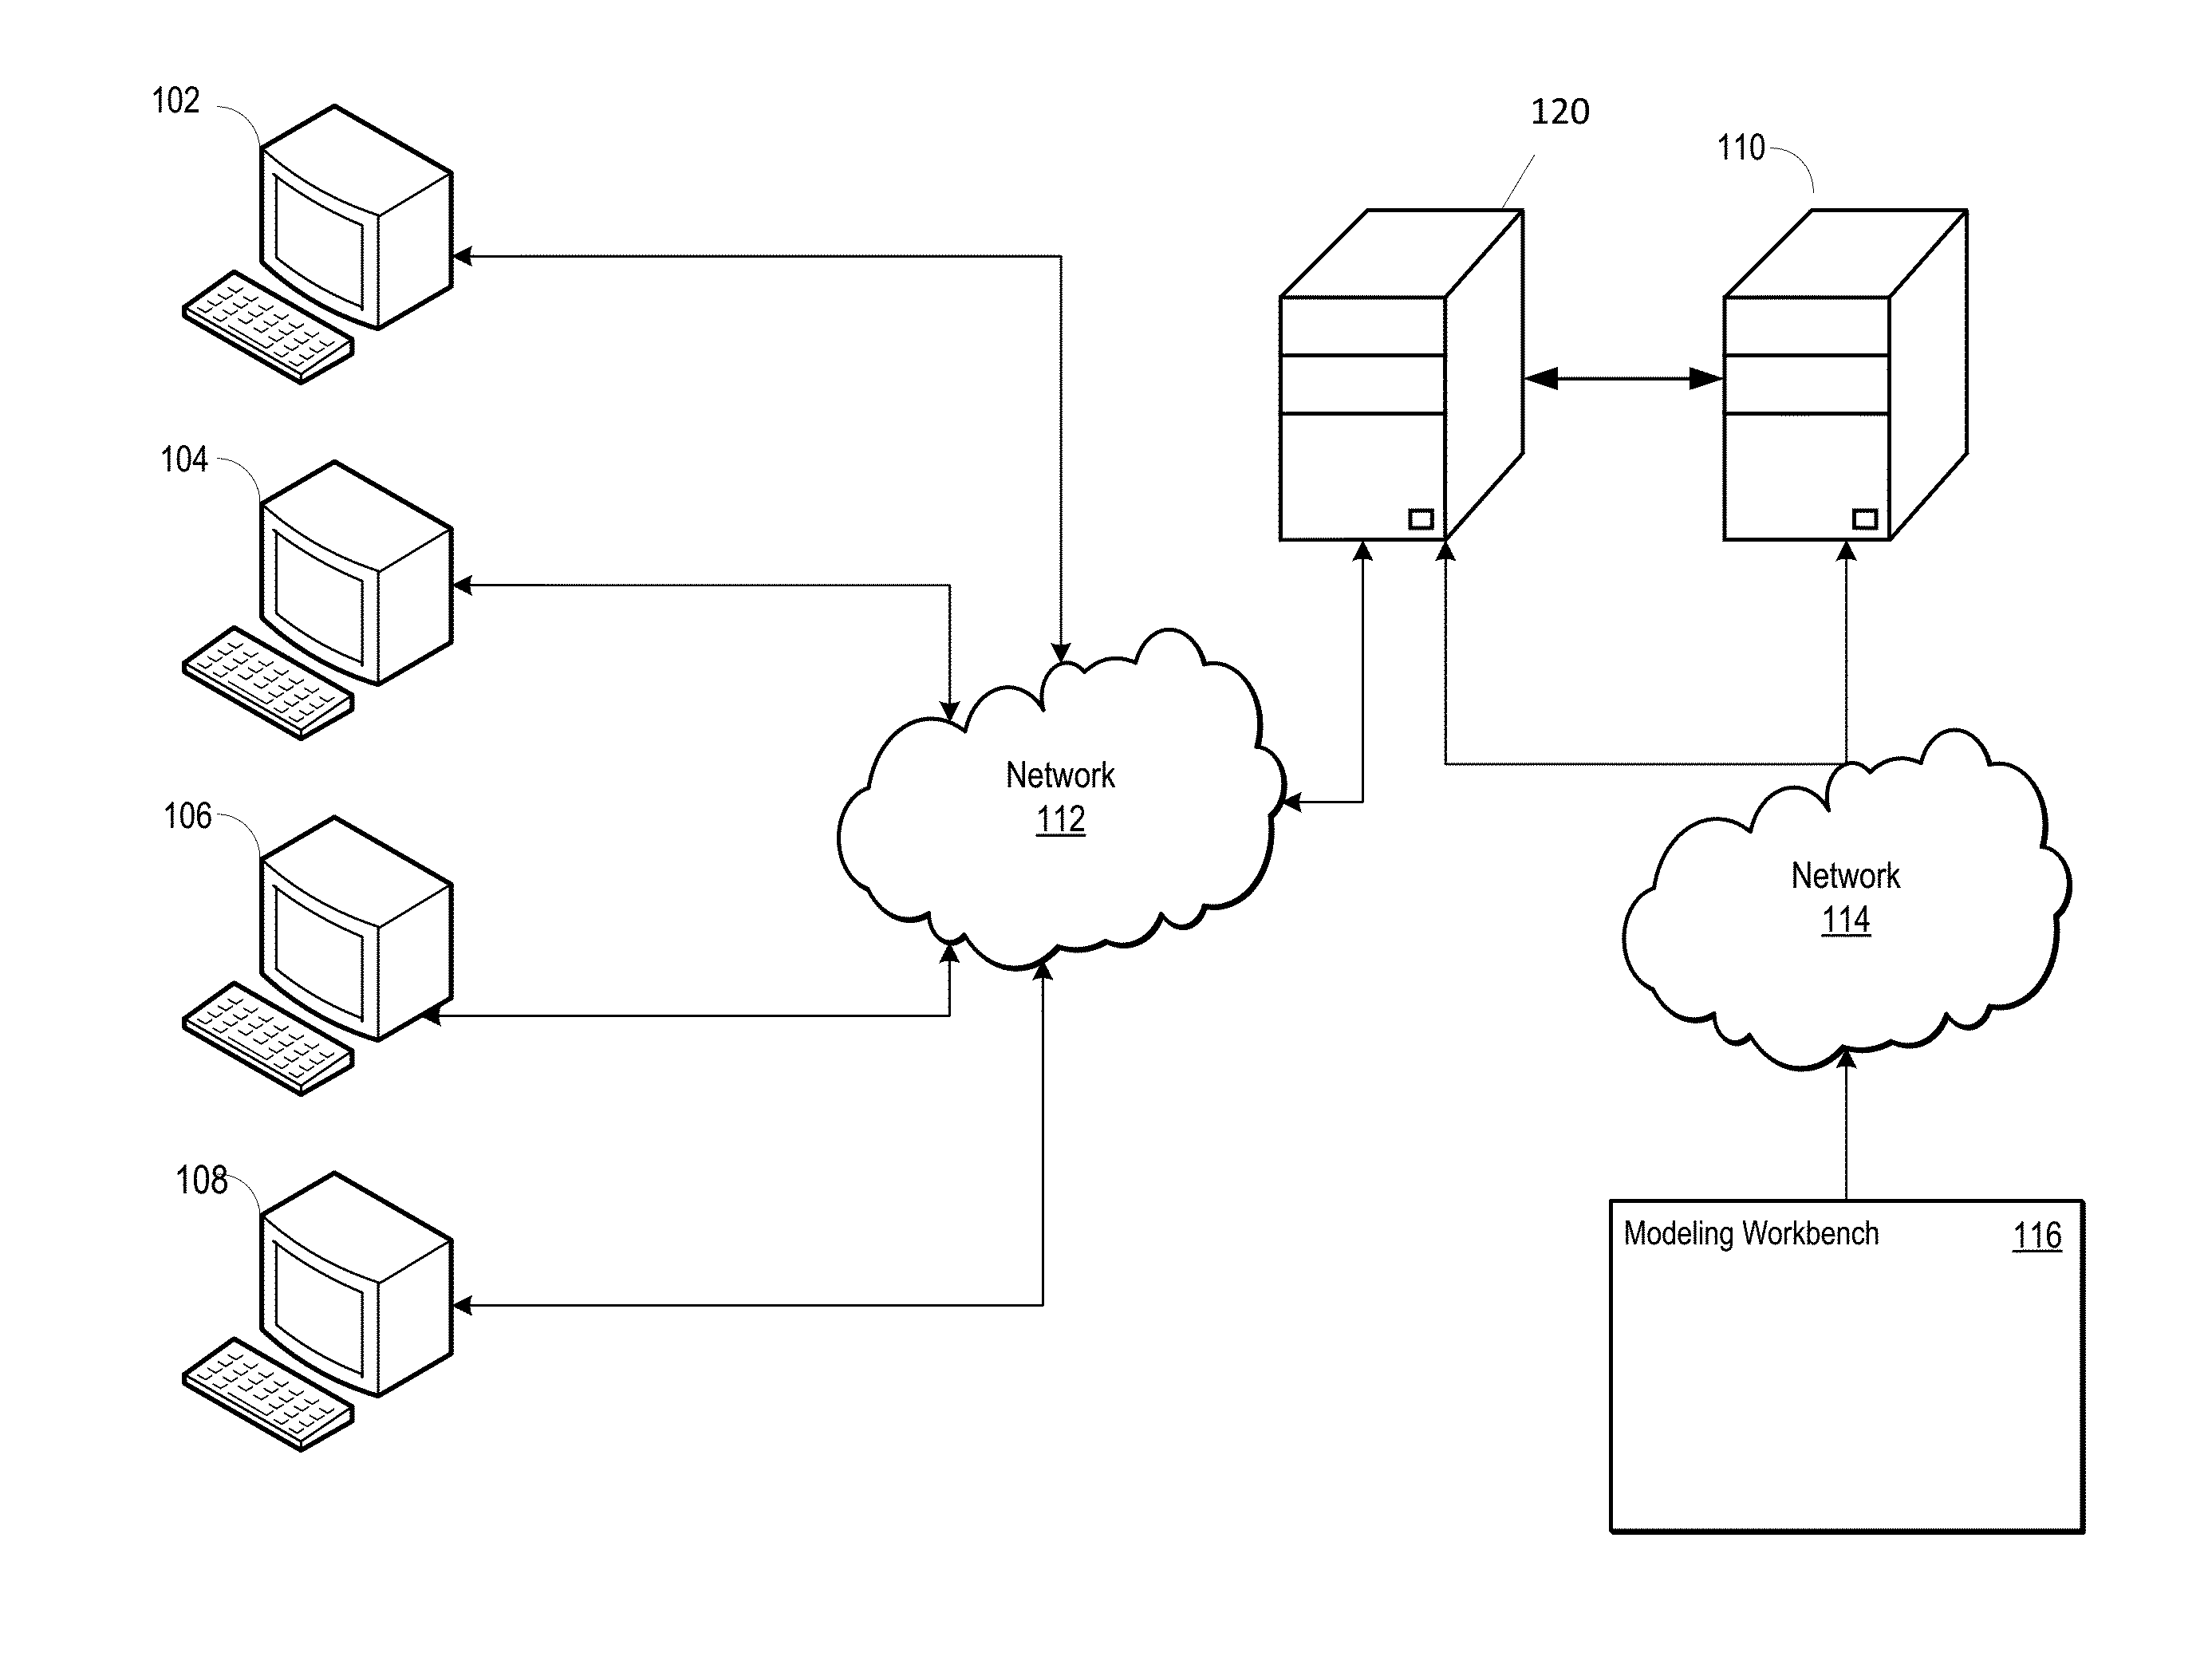 Method and system for efficient and comprehensive product configuration and searching